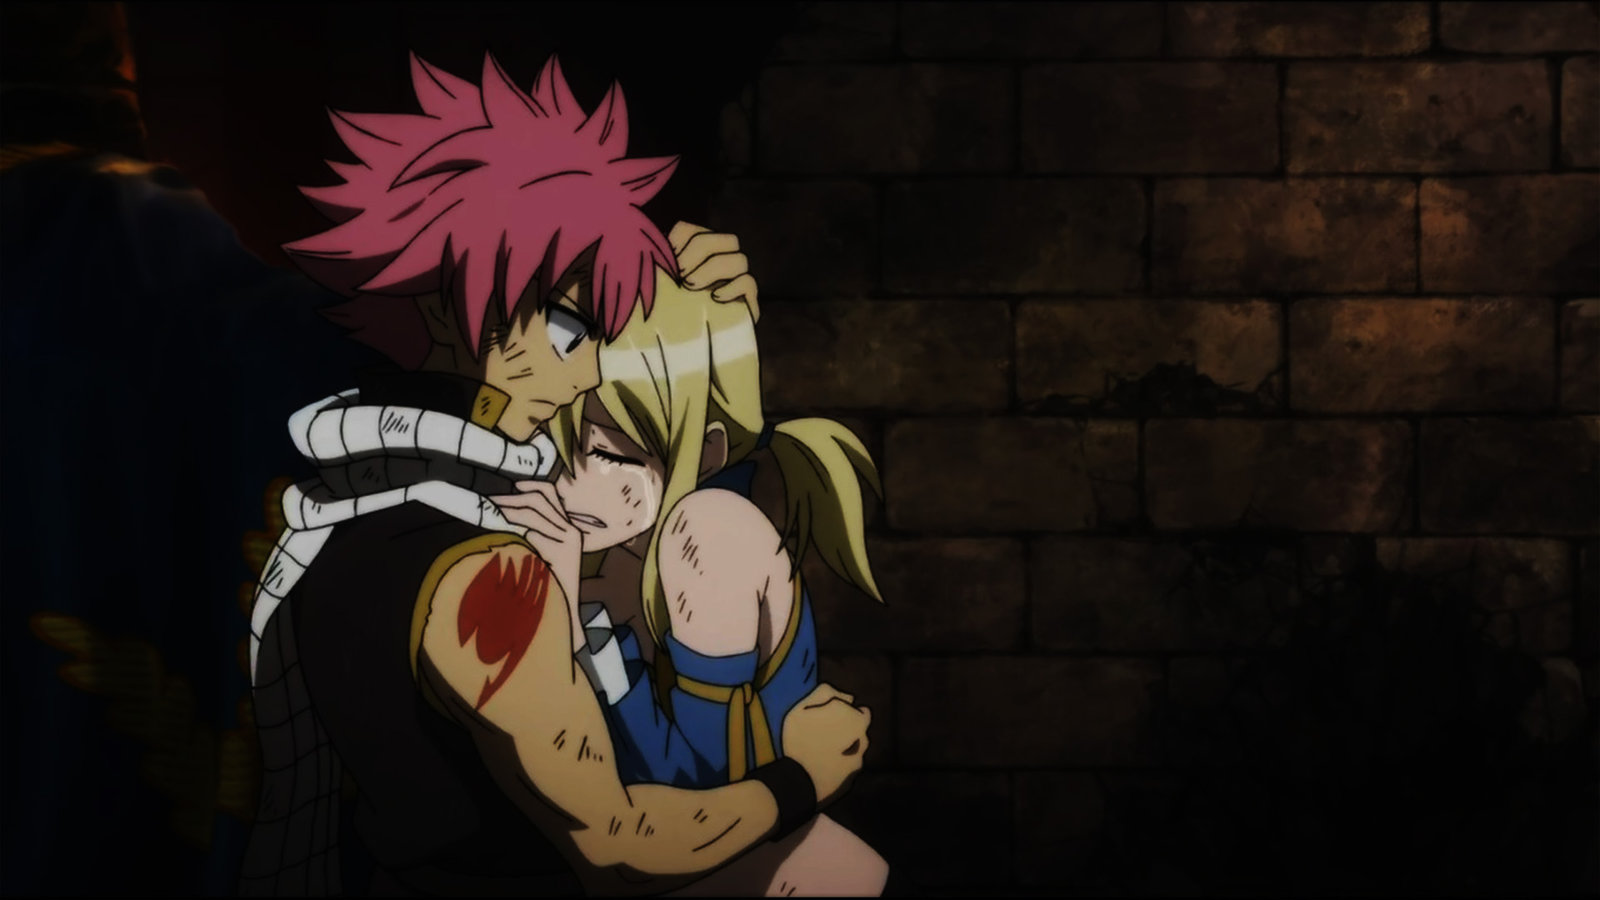 Natsu Lucy Fairy Tail Movie HD Wallpaper By Animewallpaperz On